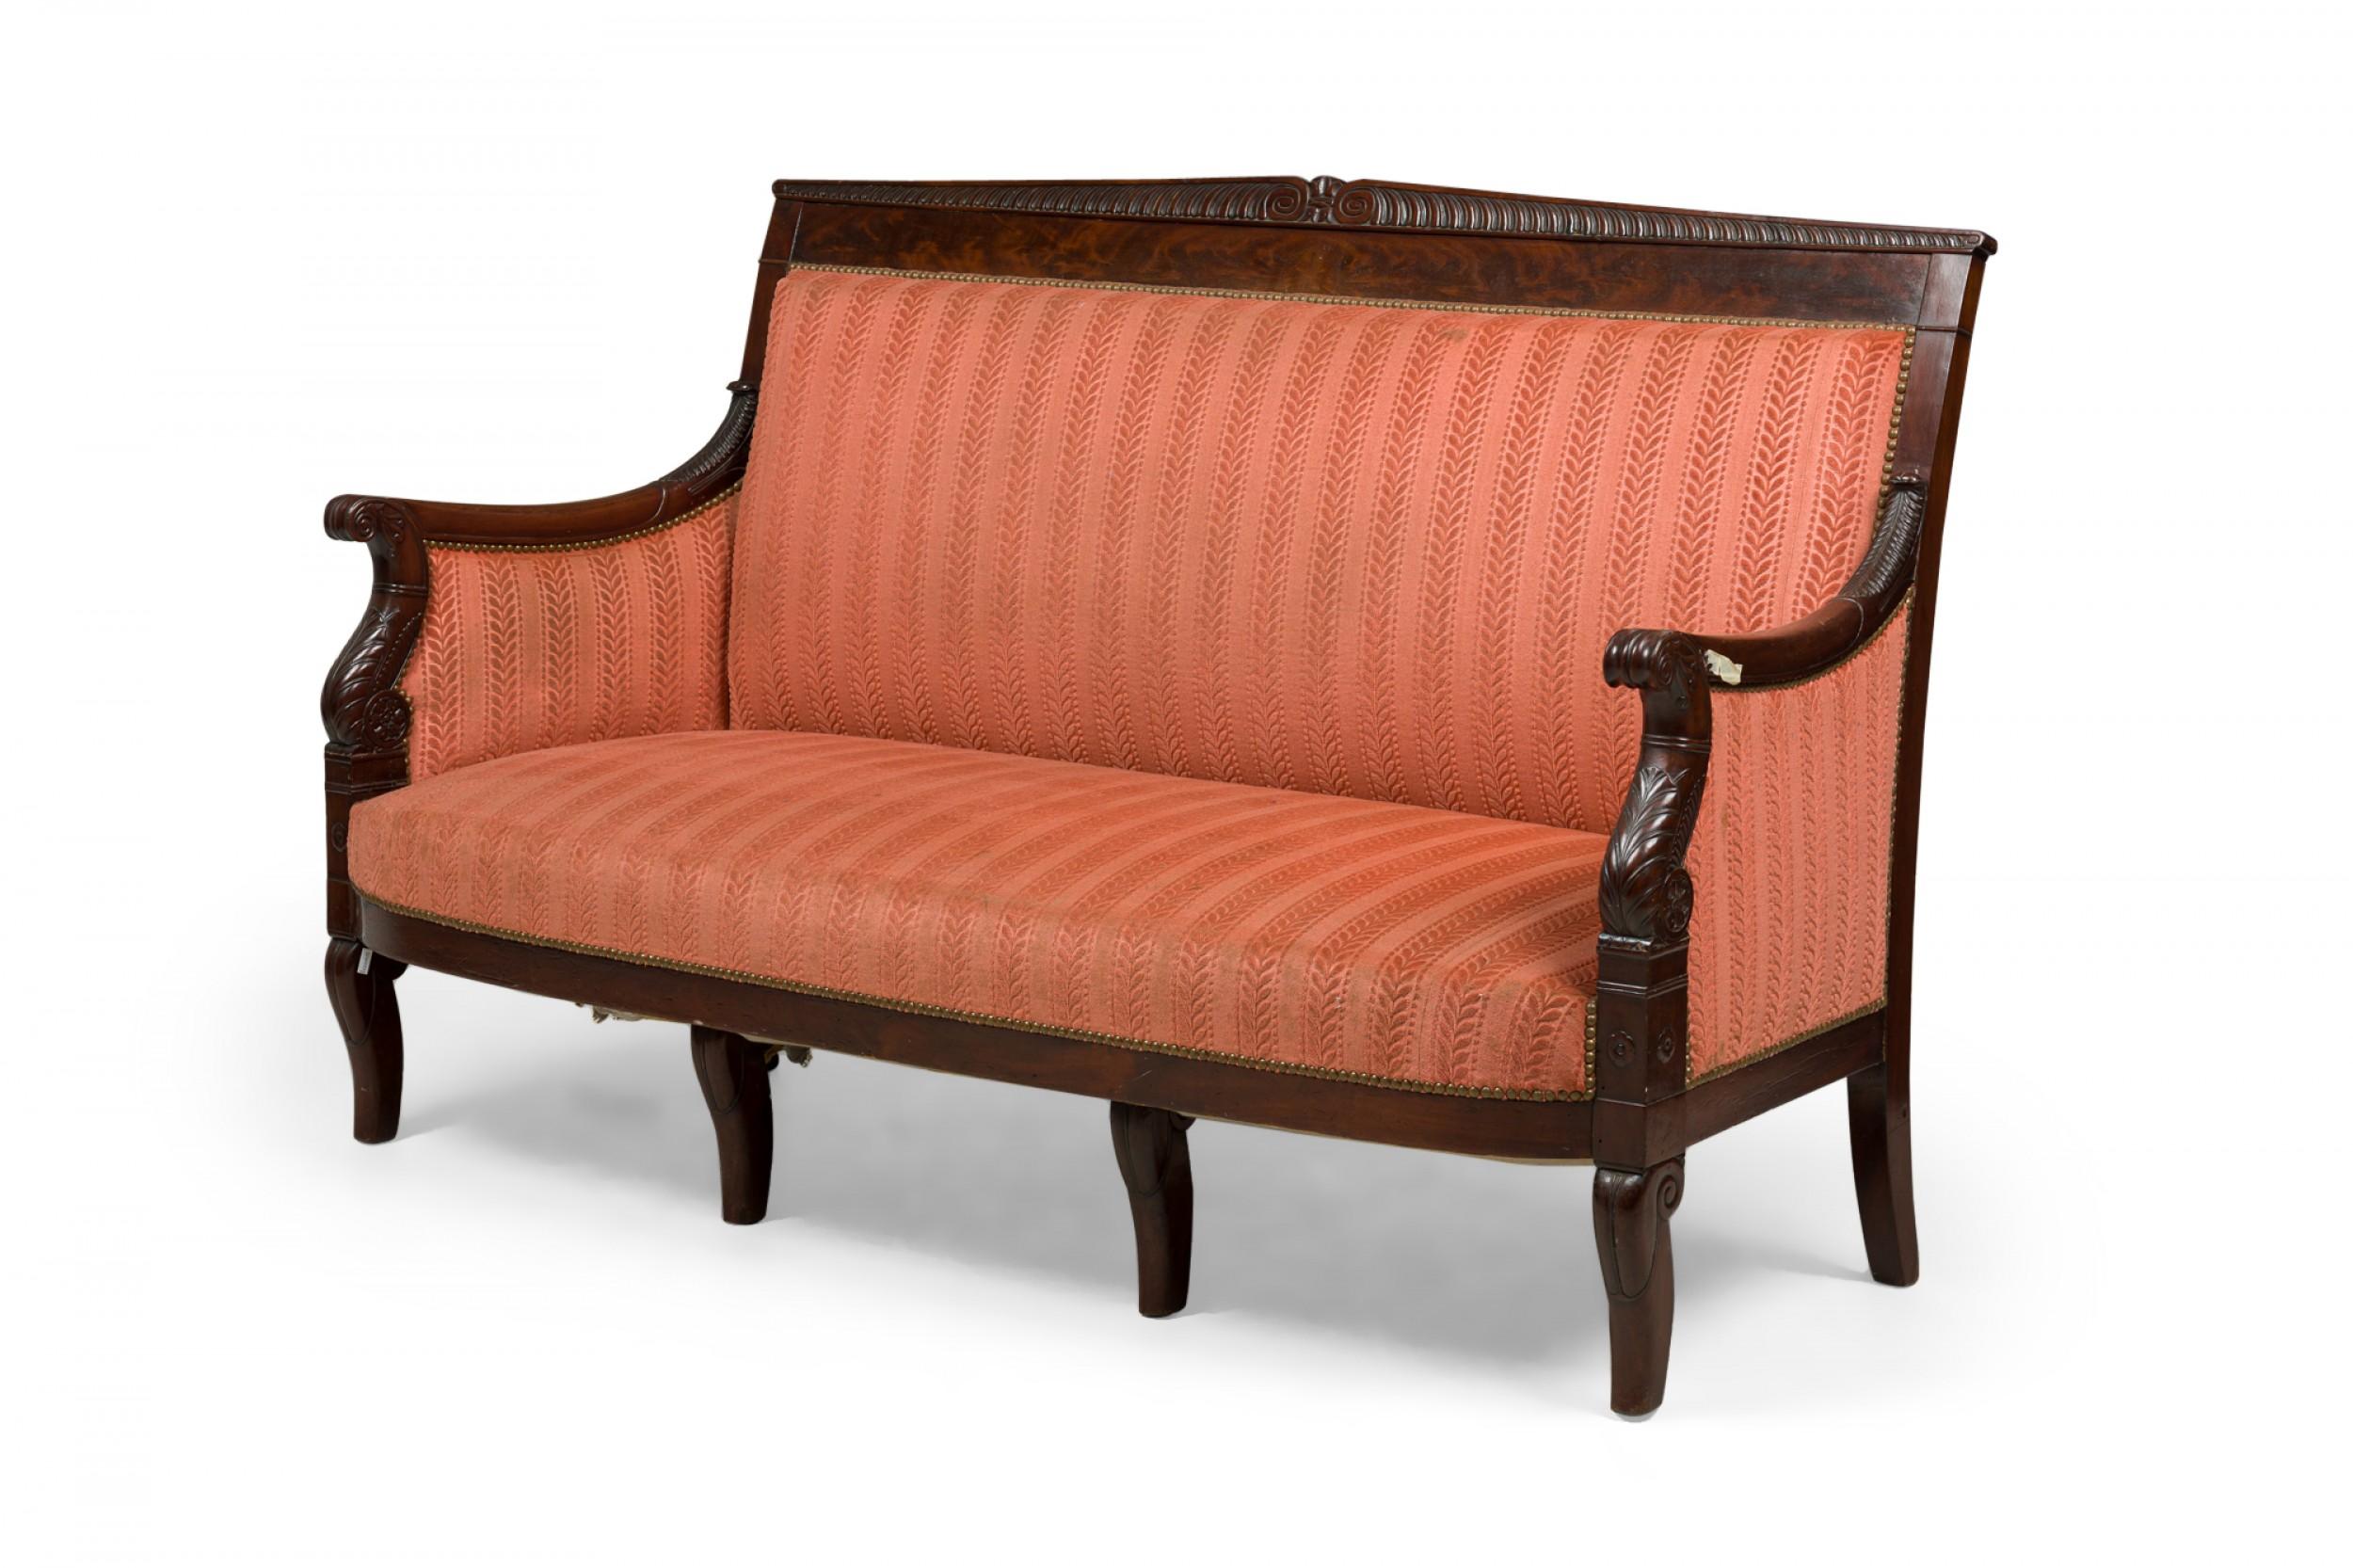 French Empire-style mahogany settee with a carved frame and striped blush pink and red upholstered seat, arms and back. (BELLANGER).